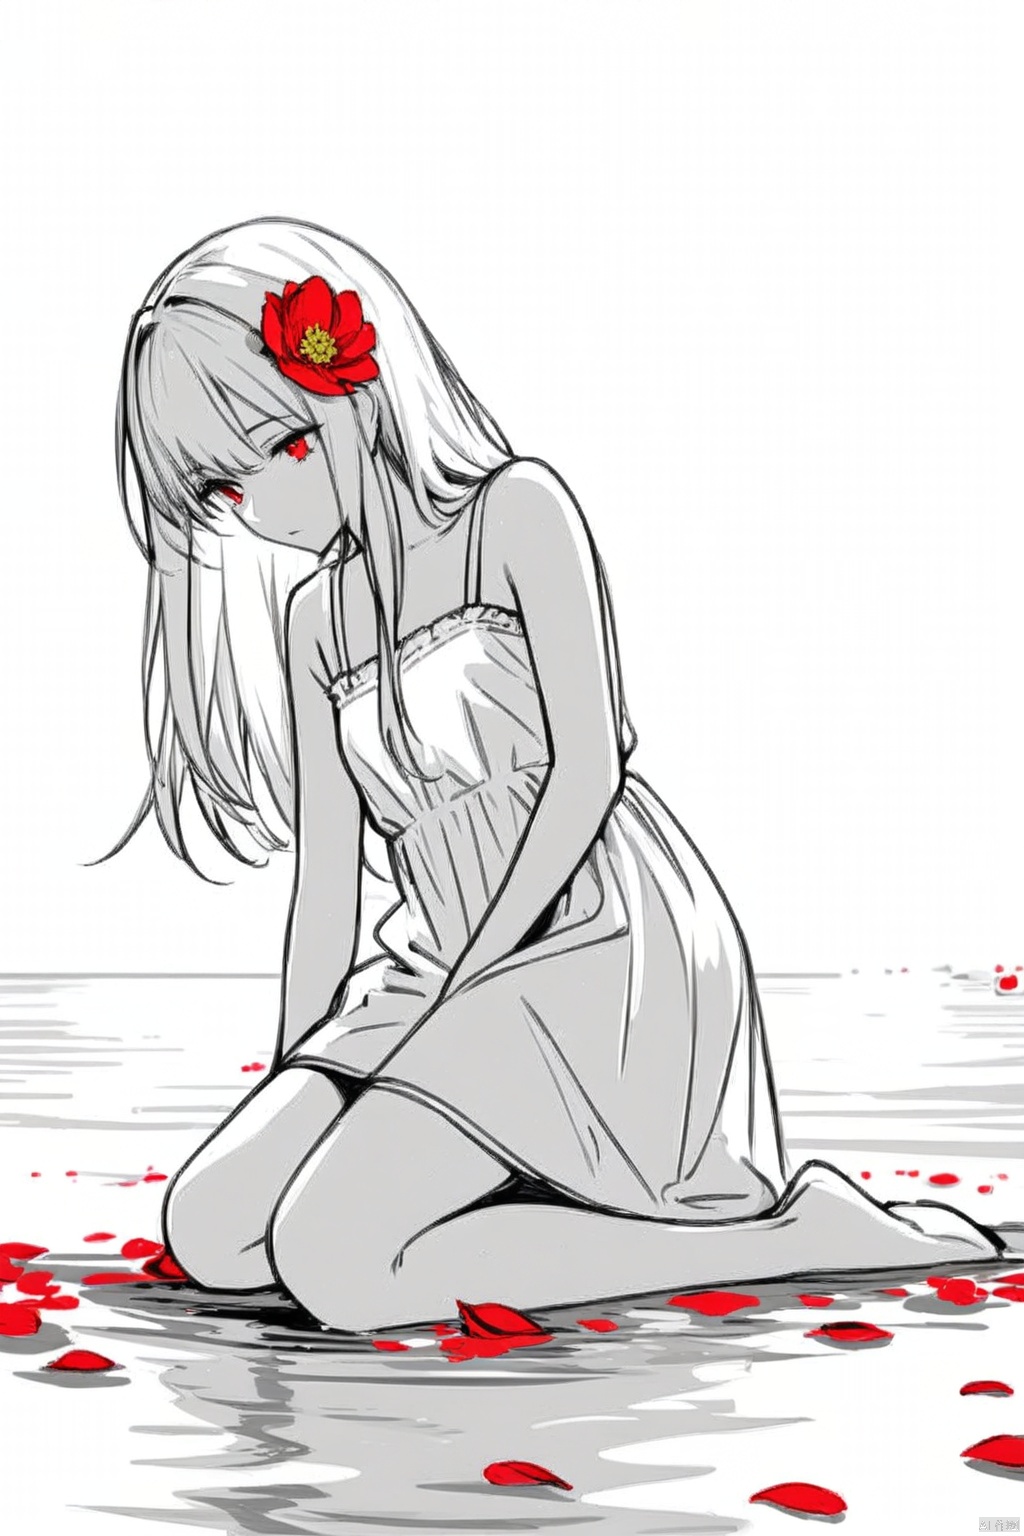  (masterpiece),(best quality),illustration,ultra detailed,hdr,Depth of field,(colorful),1girl,red eyes,white long translucent night gown,expressionless,(white hair),hair cover one eye,long hair,red hair flower,kneeling on lake,blood,(plenty of red petals:1.35),(white background:1.5),(English text),greyscale,monochrome,greyscale,monochrome,sketch, Kal'tsit